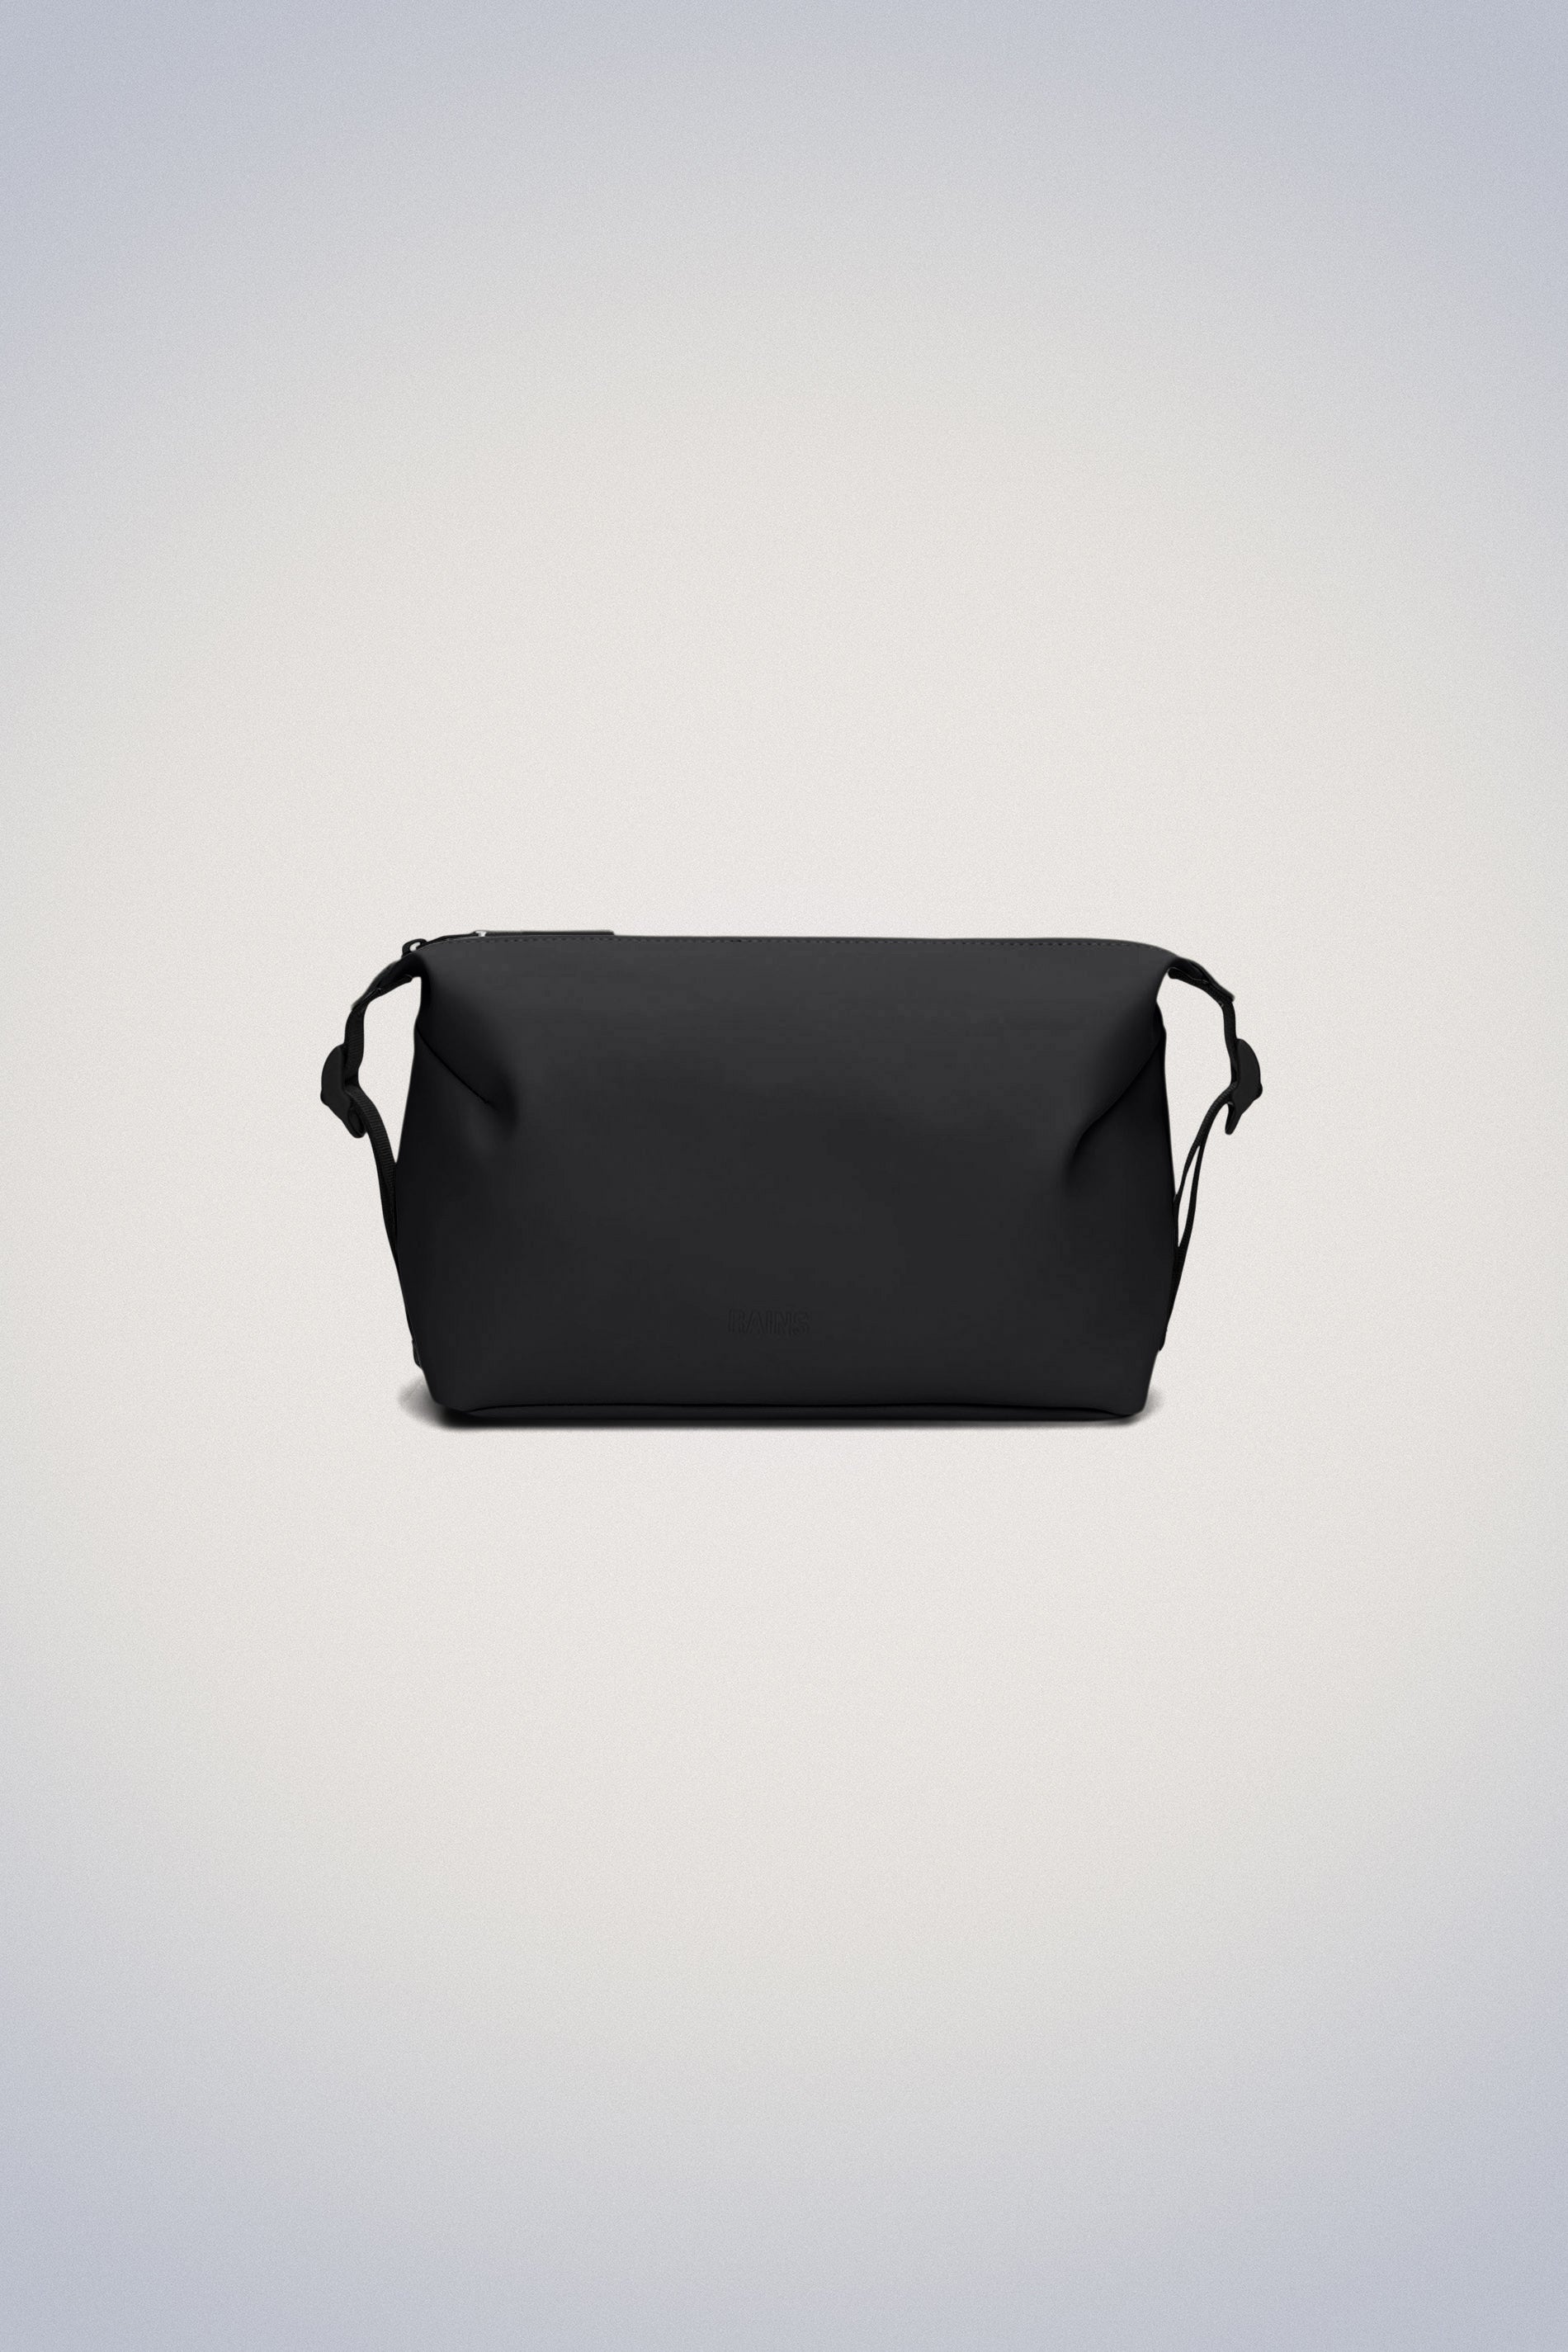 Rains® Hilo Wash Bag in Black for $50, Free Shipping